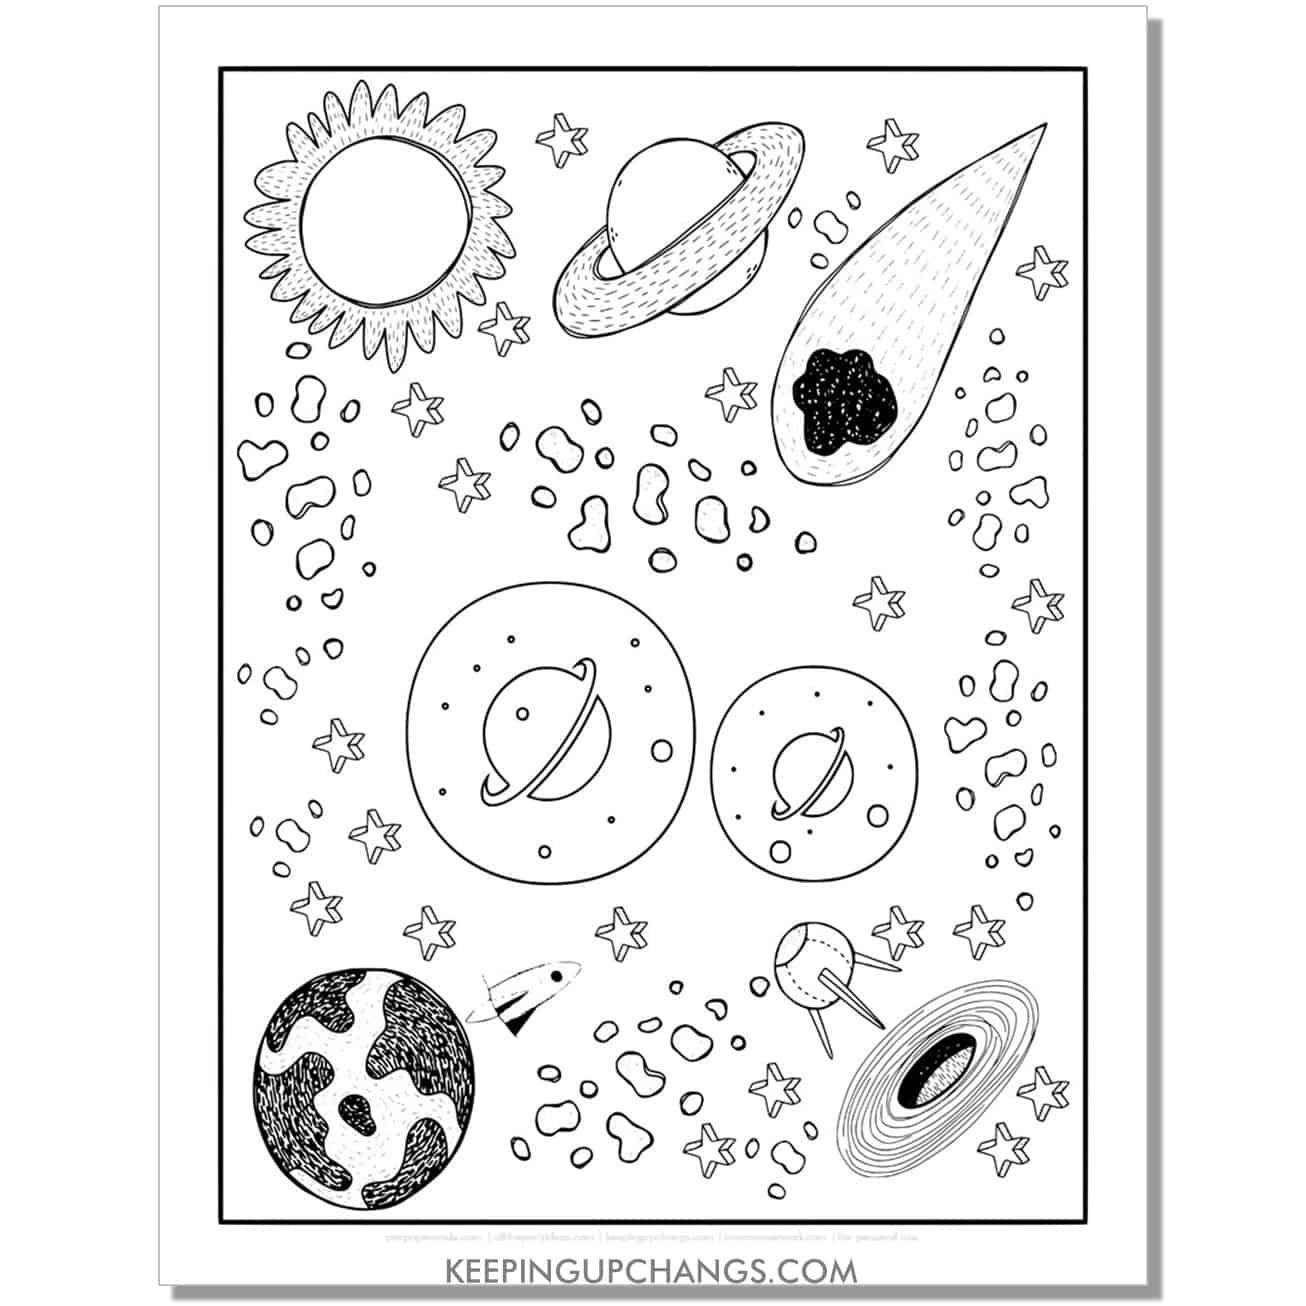 free alphabet letter o coloring page for kids with rockets, space theme.